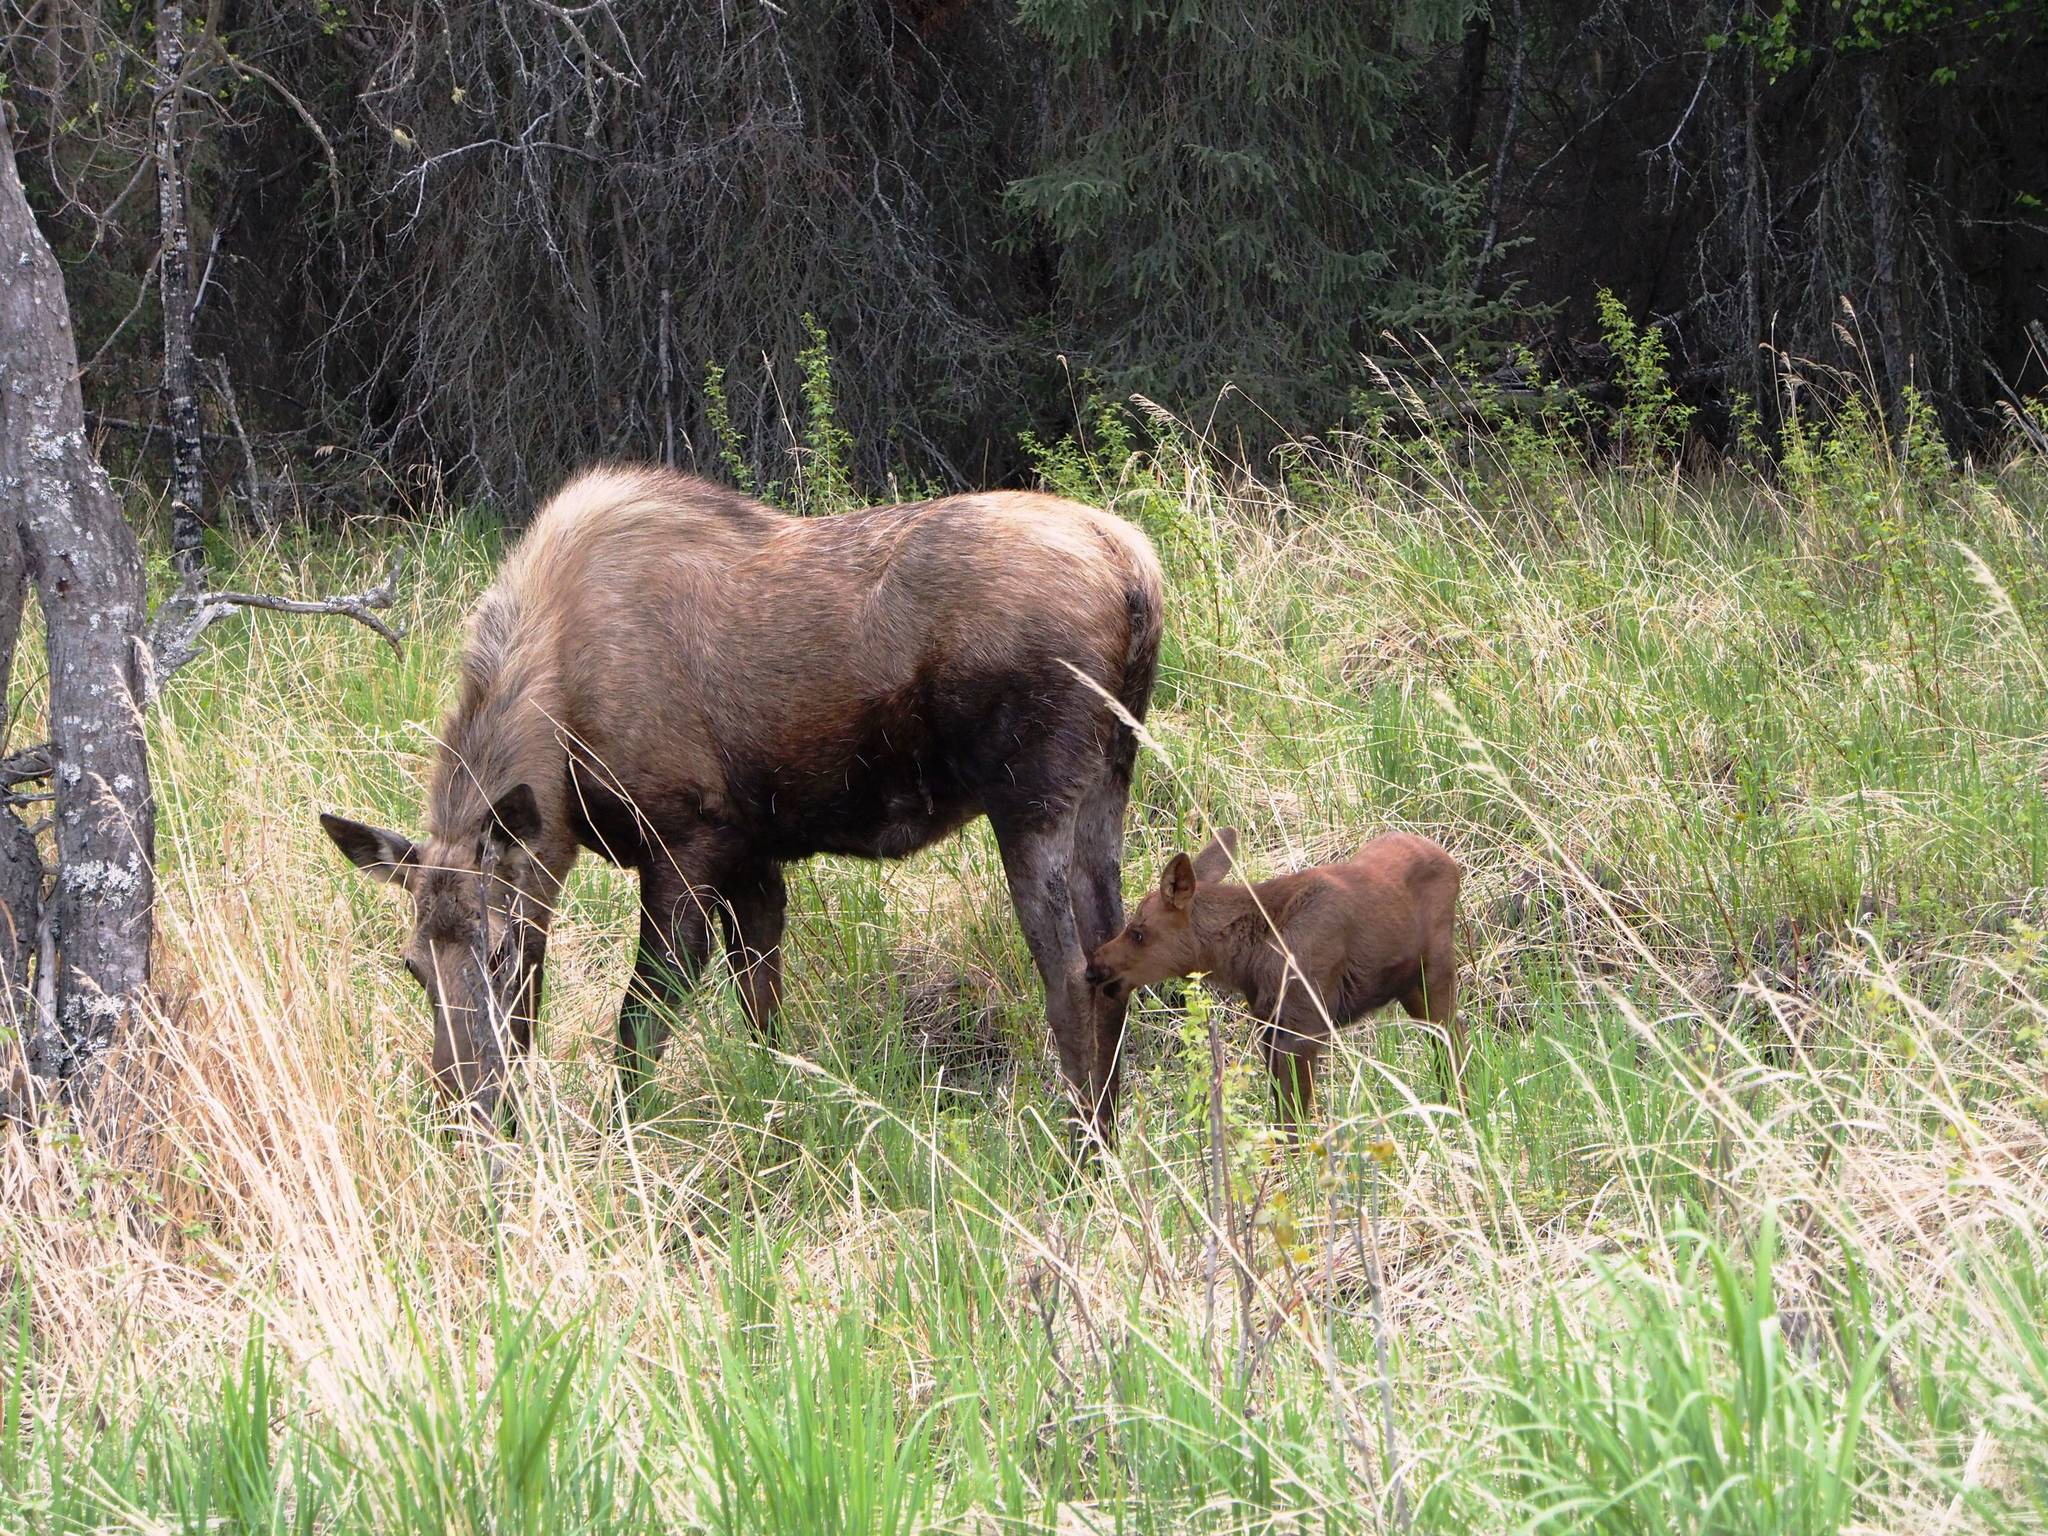 Moose cows are notorious for being great mothers to their young. (Photo by John Morton)